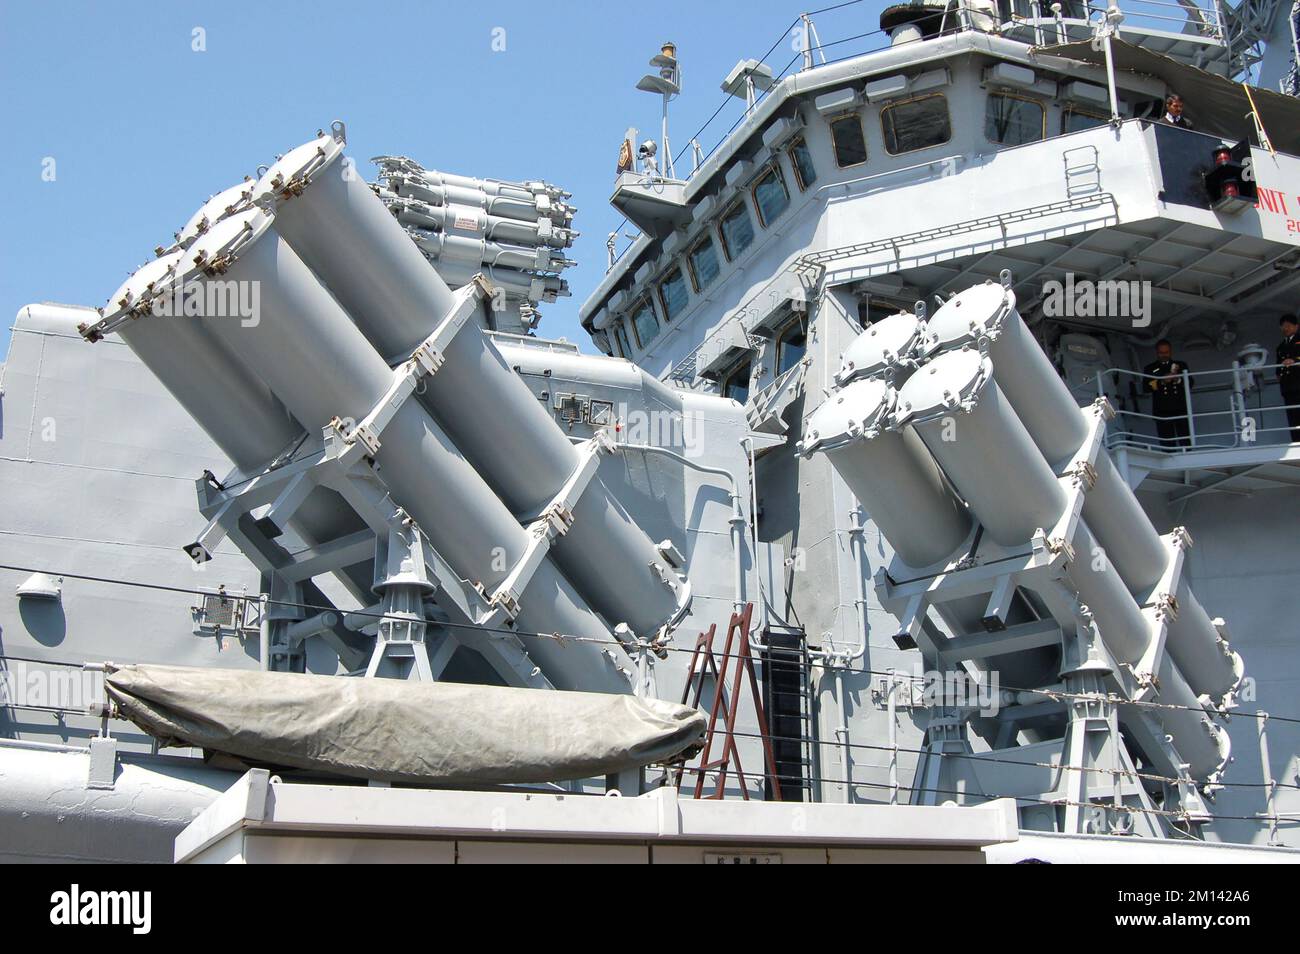 Kanagawa Prefecture, Japan - April 14, 2007: Indian Navy 3M24 Uran ship-to-ship missile launcher on INS Mysore (D60). Stock Photo